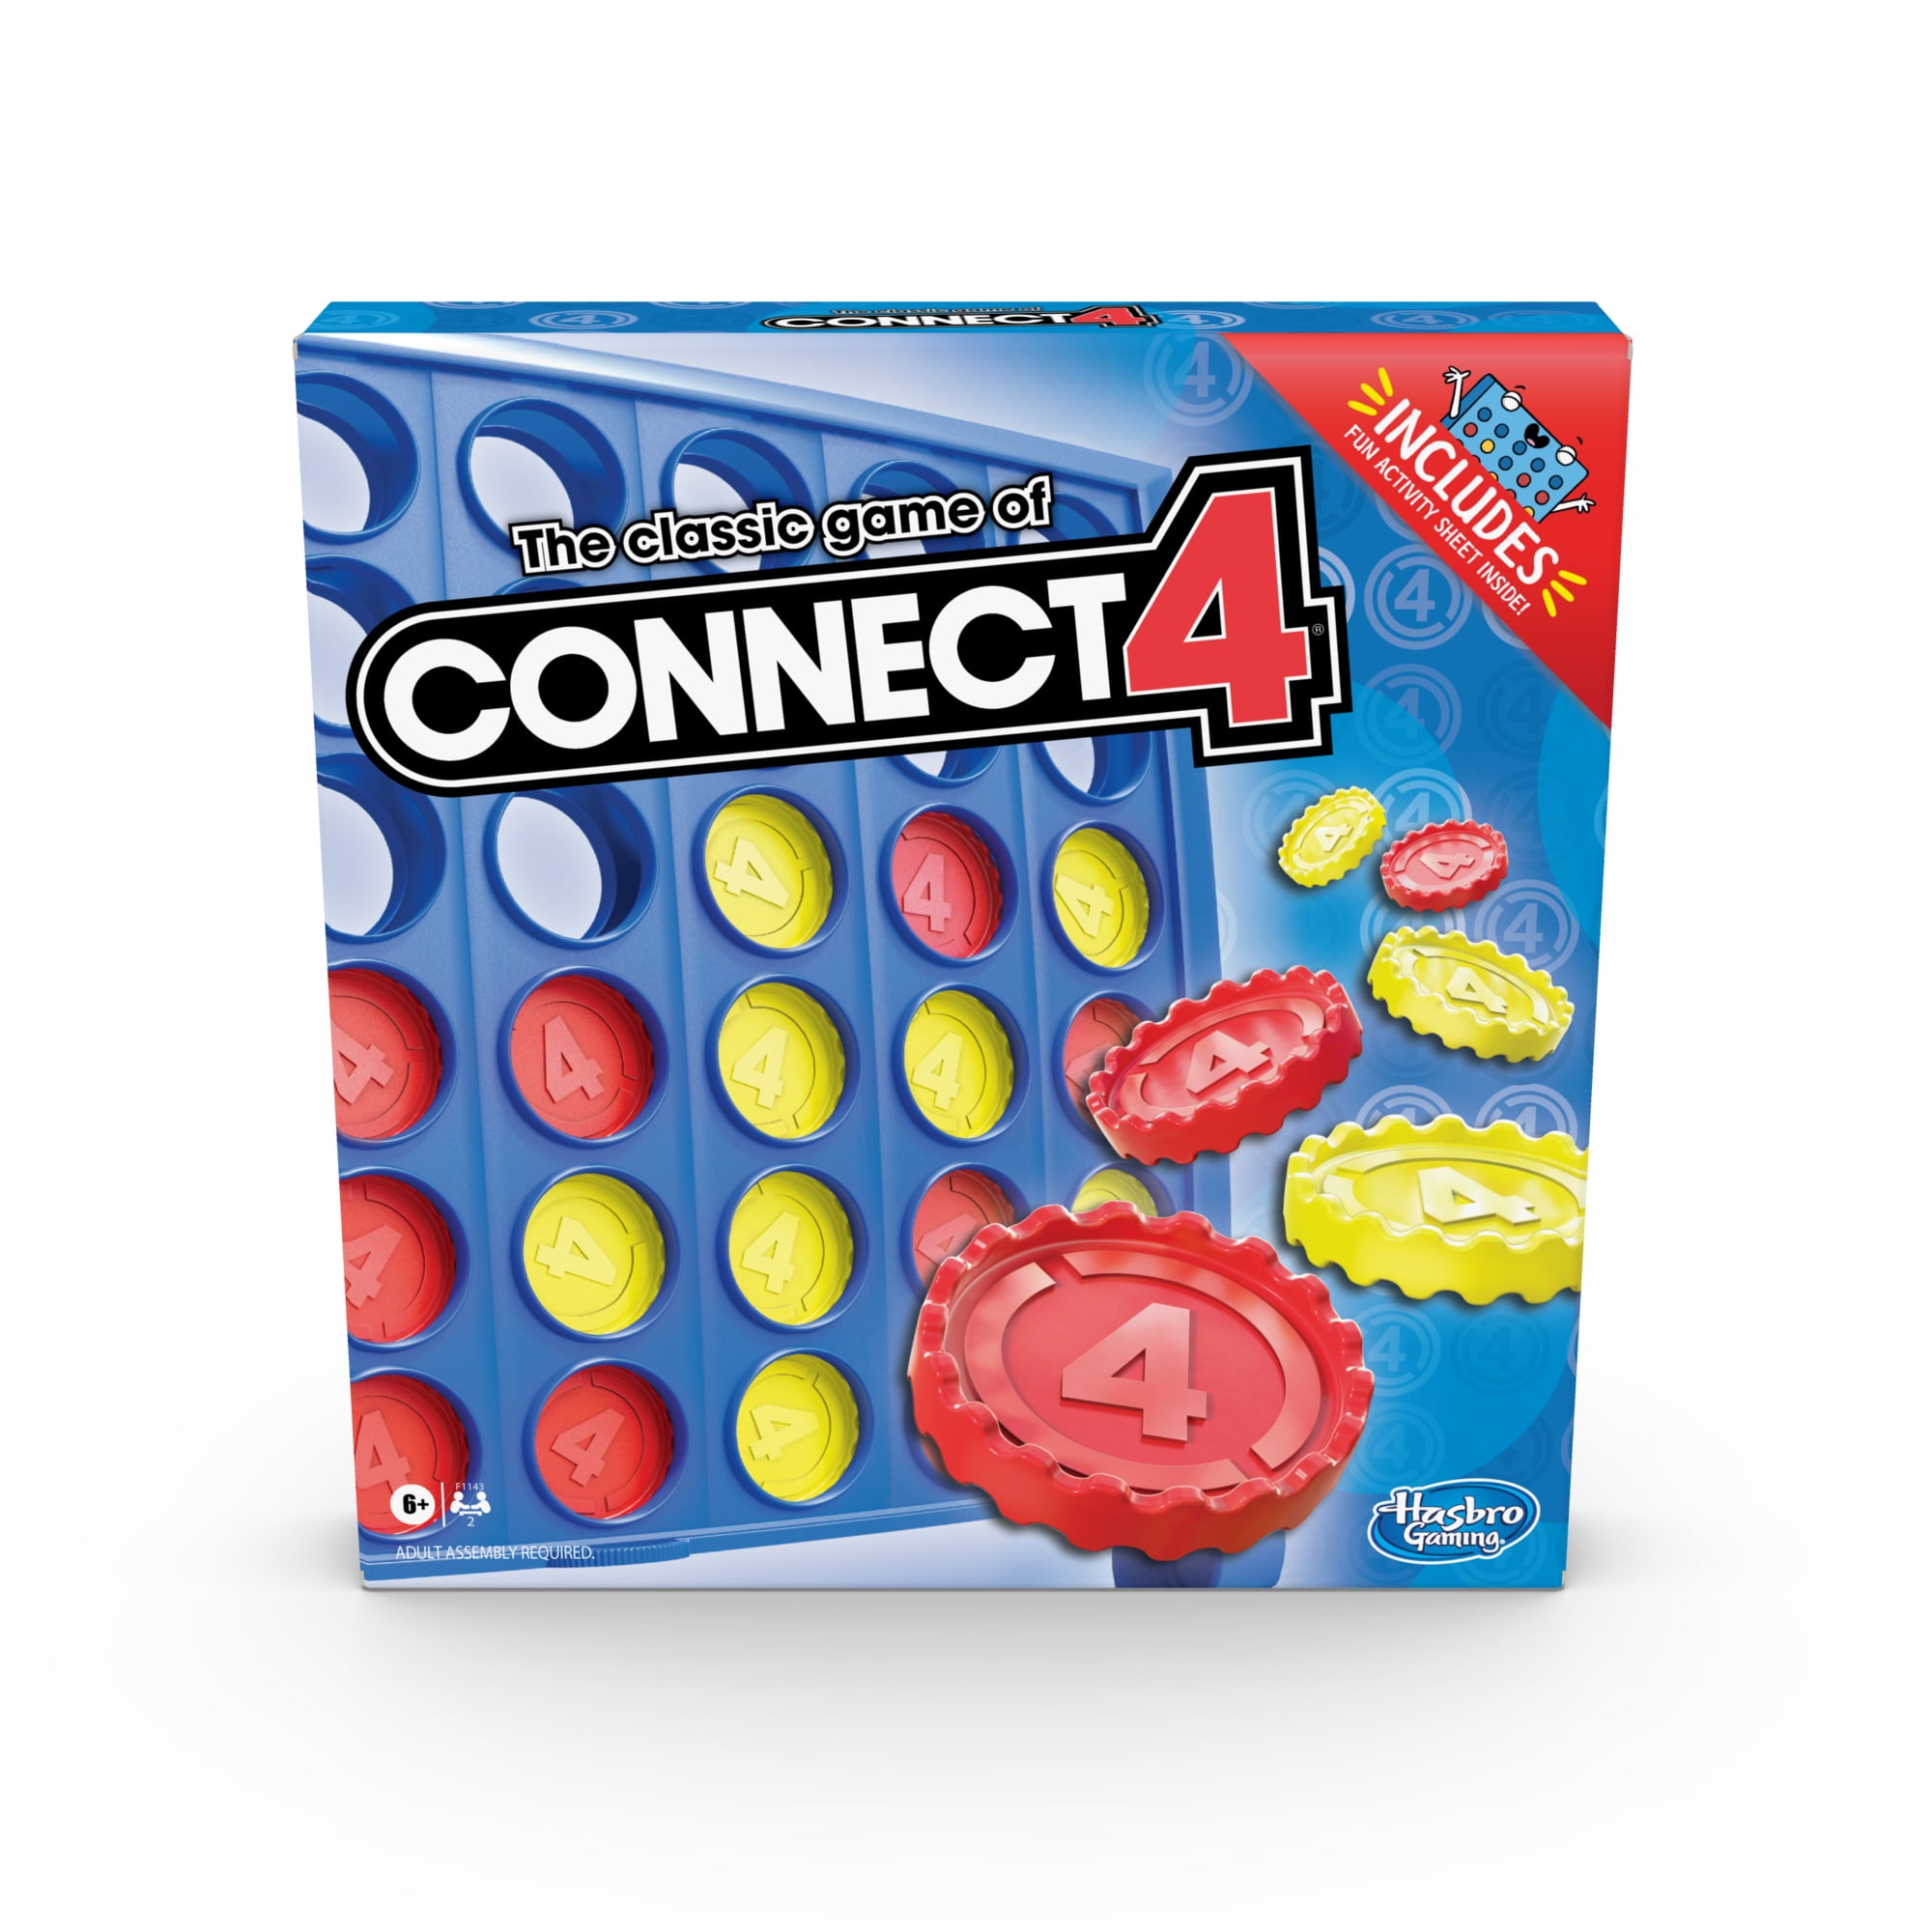 2 RED 2 GREEN 2 BLUE 2 YELLOW Connect 4 x 4 Grid Challenge Game REPLACEMENT 